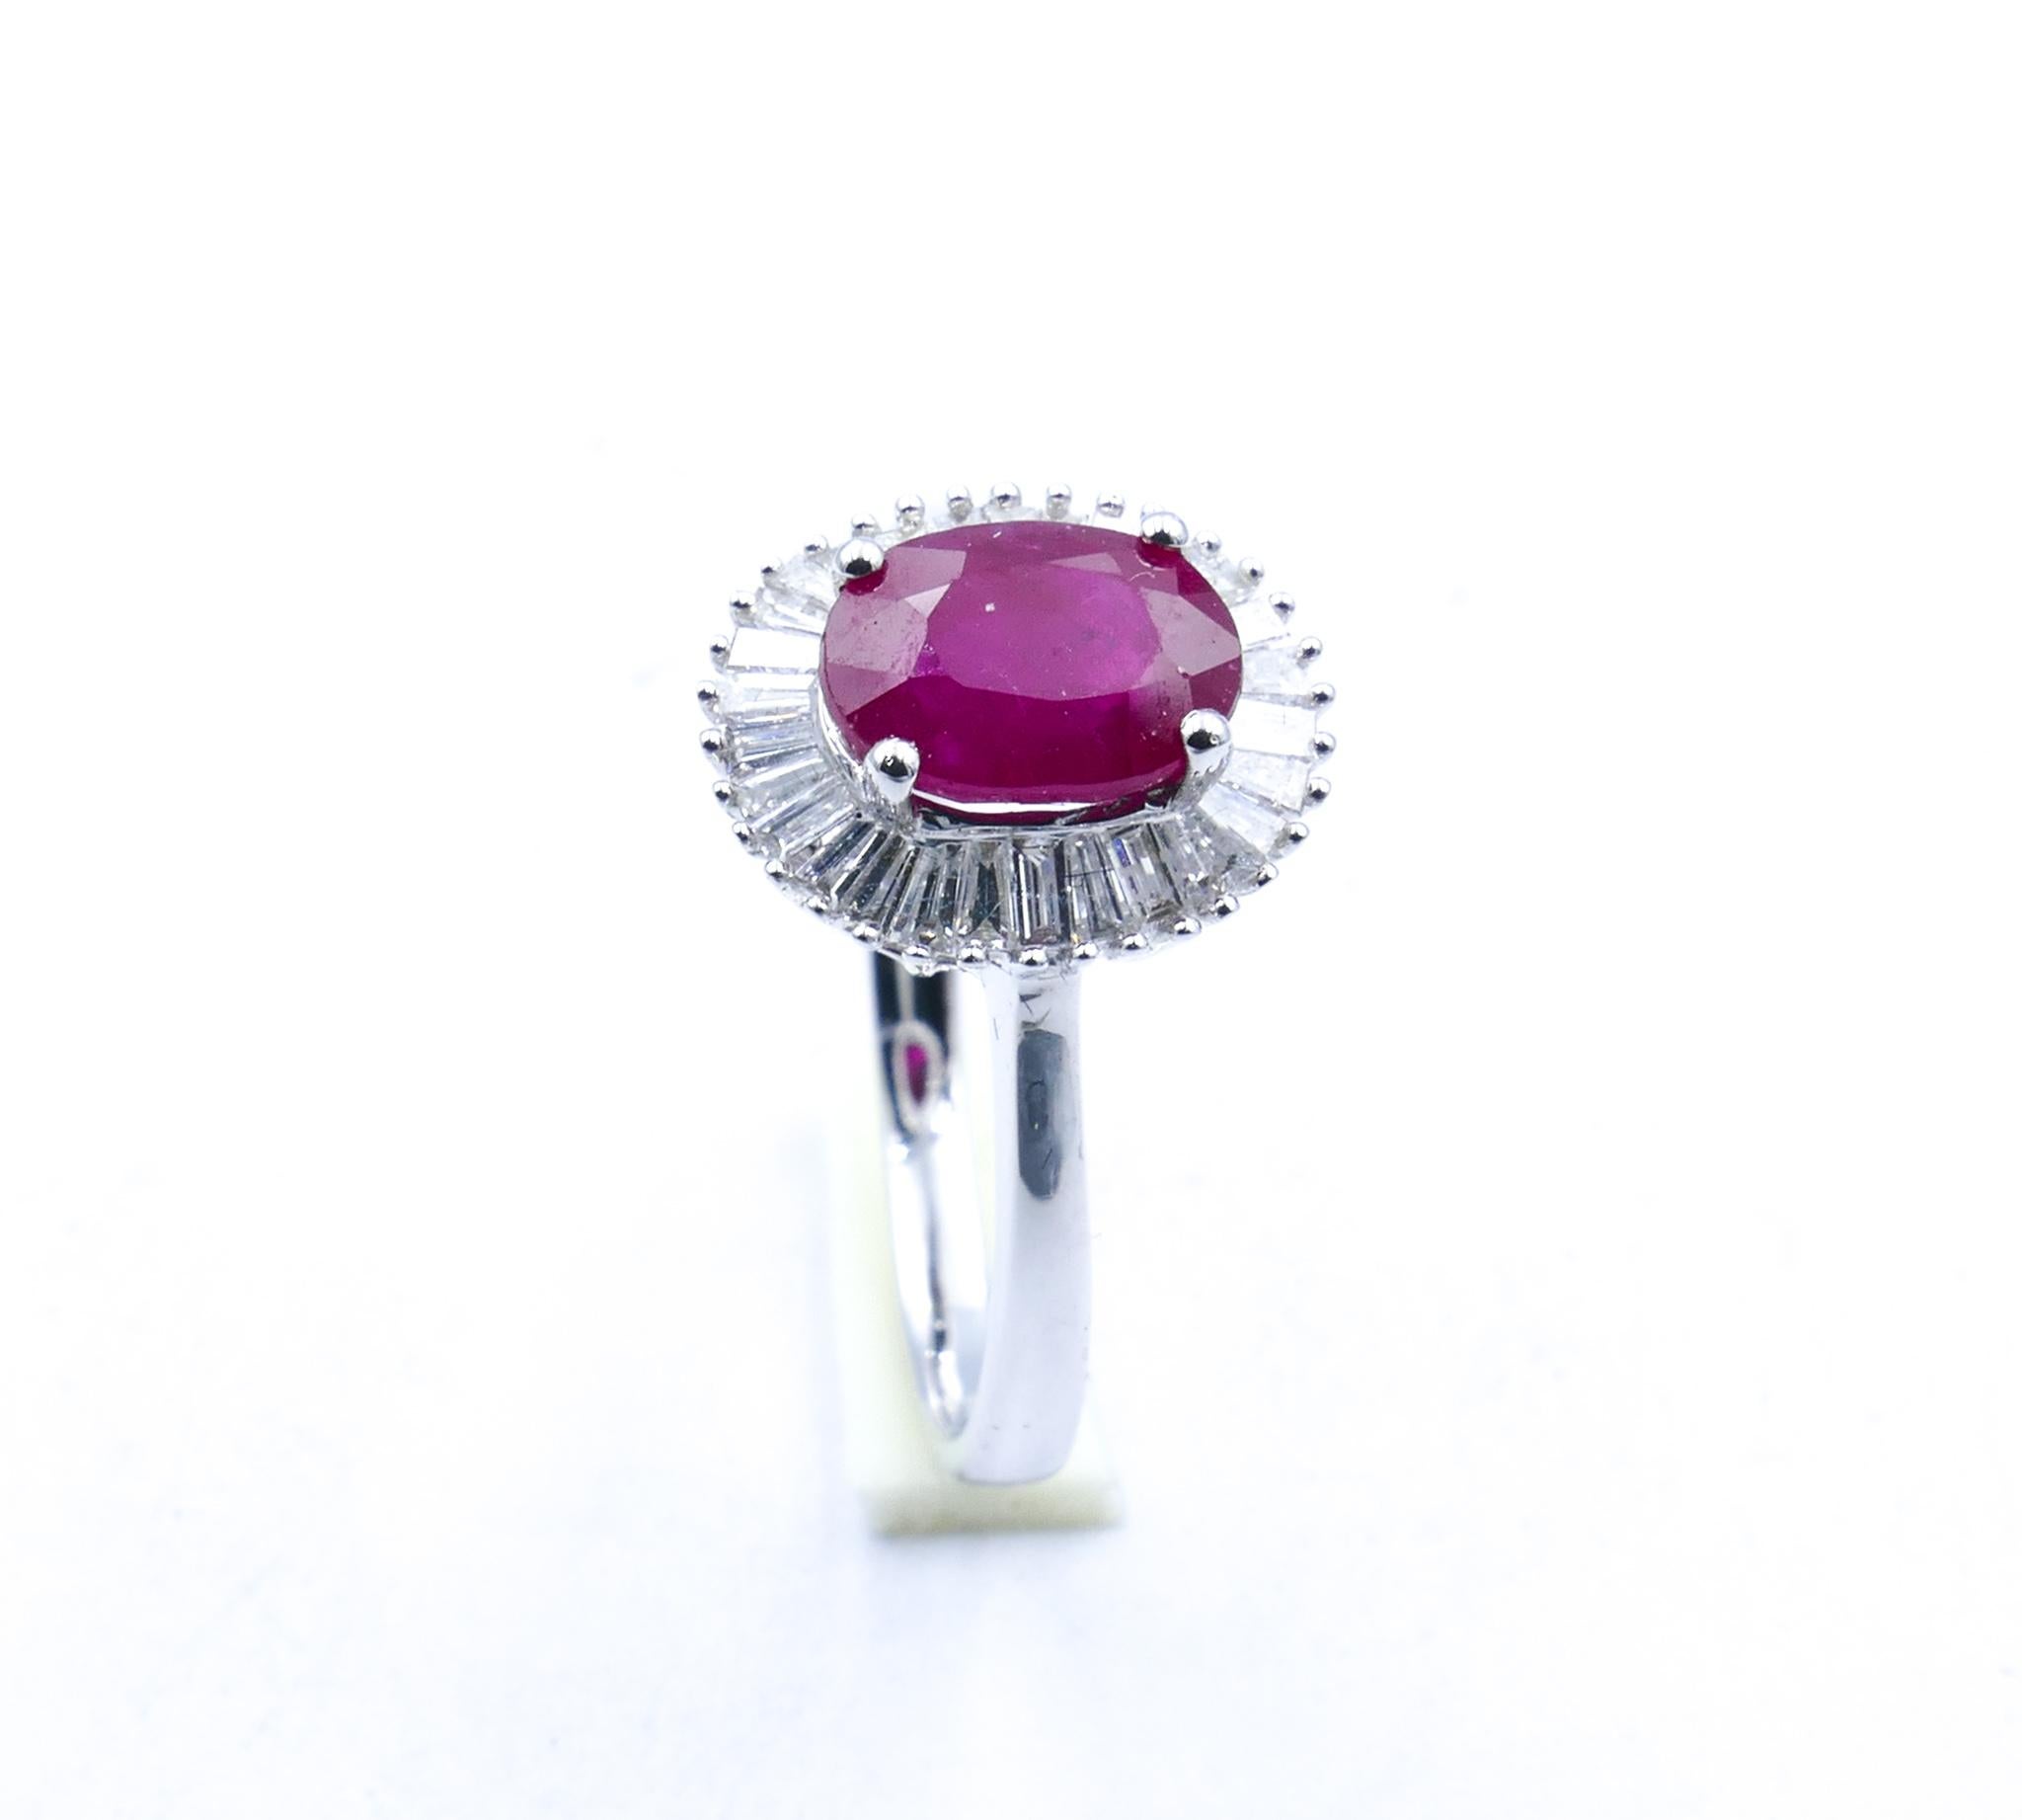 The smaller version of the classic Ballerina Style Ring is this lovely, vivid Ruby & Diamond Baguette Ring.
Great for a '40th' any occasion, Ruby being the stone for that Anniversary/Birthday.

Brand new, beautifully crafted in 18ct White Gold, the